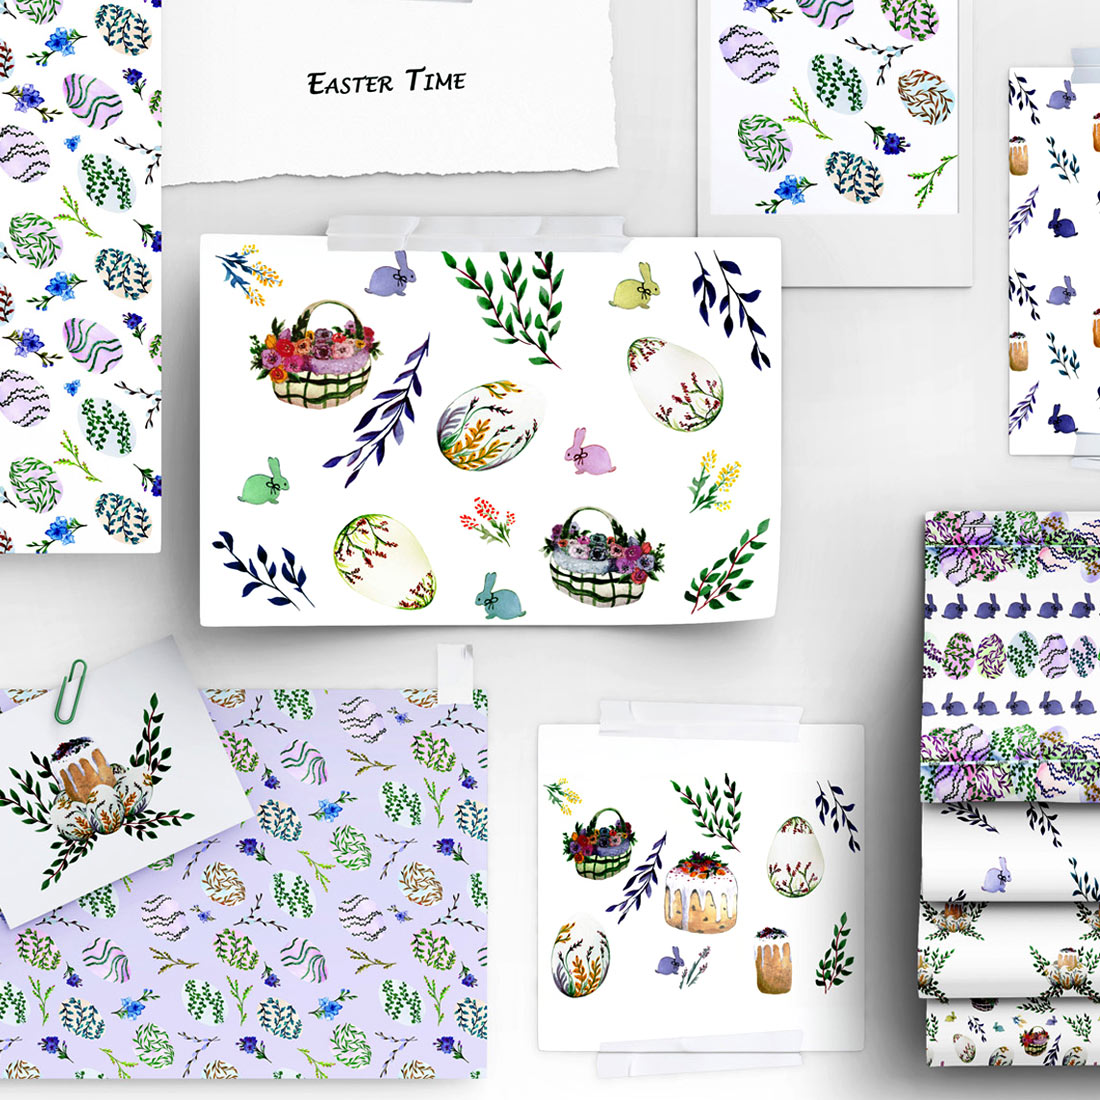 Watercolor Illustrations And Seamless Patterns With Spring Easter Mood Preview Image.